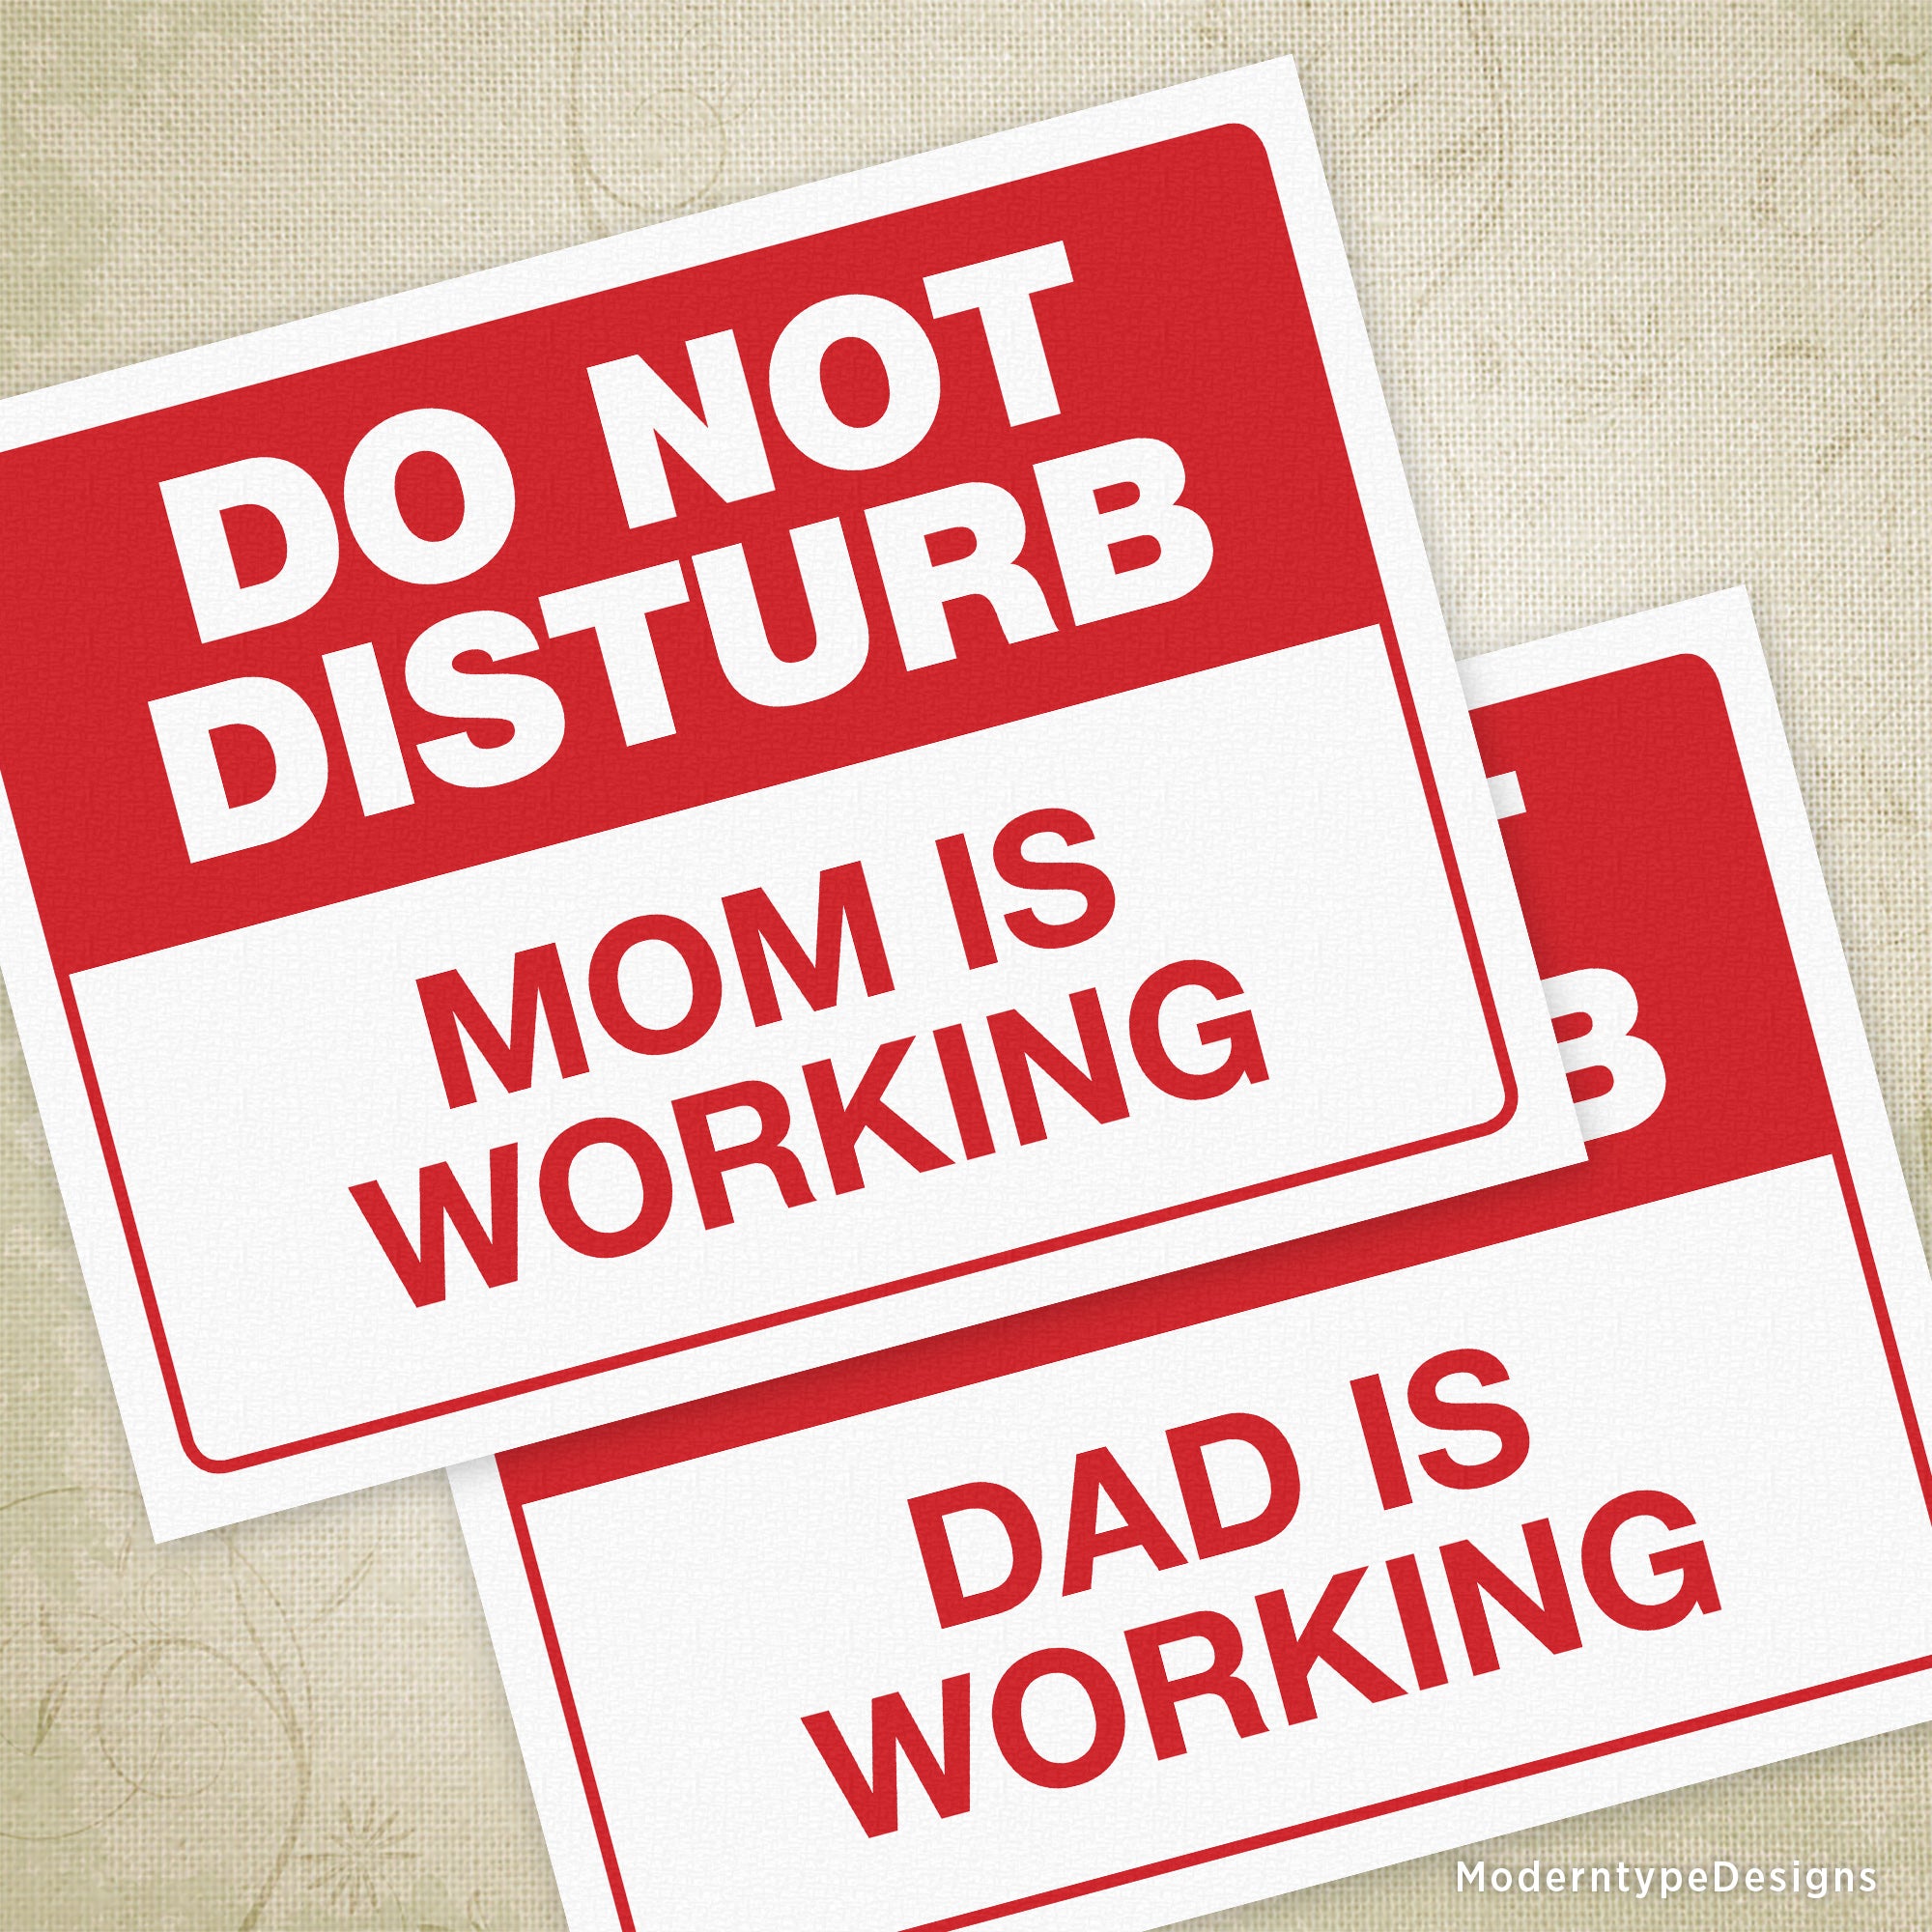 Do Not Disturb Mom or Dad is Working Printable Signs